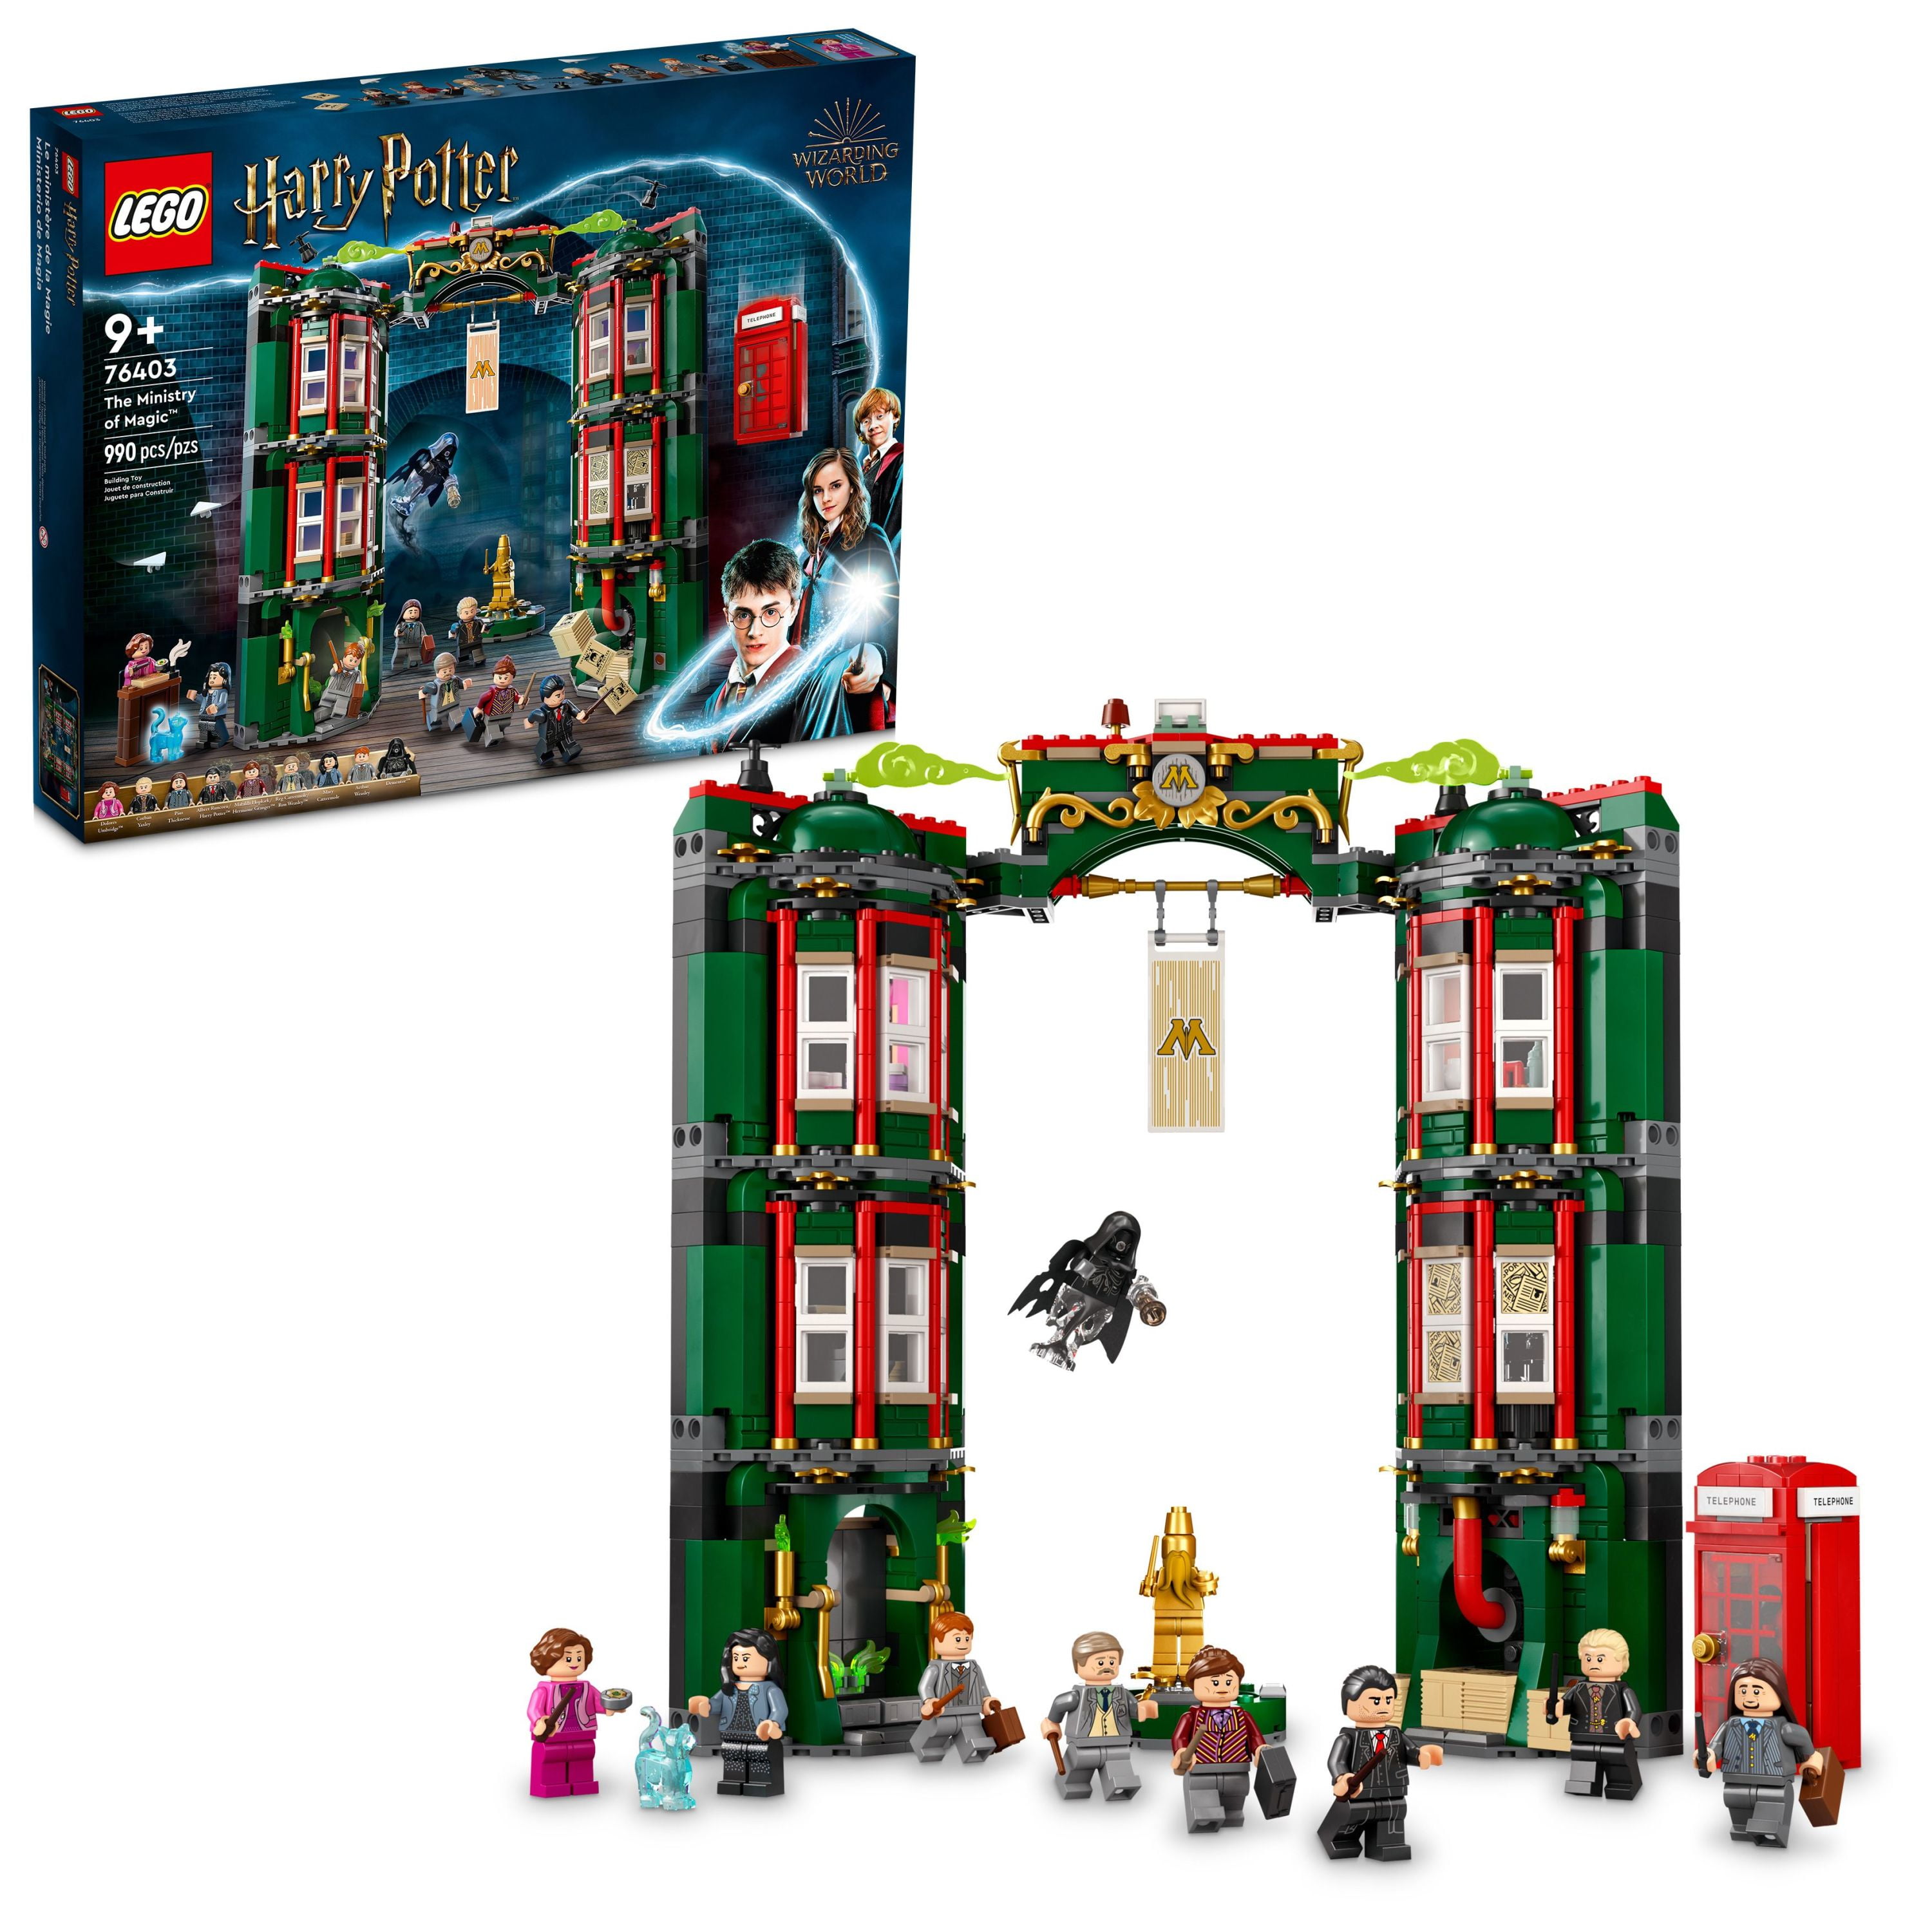 LEGO Harry Potter The Ministry of Magic 76403 Modular Model Building Toy with 12 Minifigures and Transformation Feature, Collectible Wizarding World Gifts